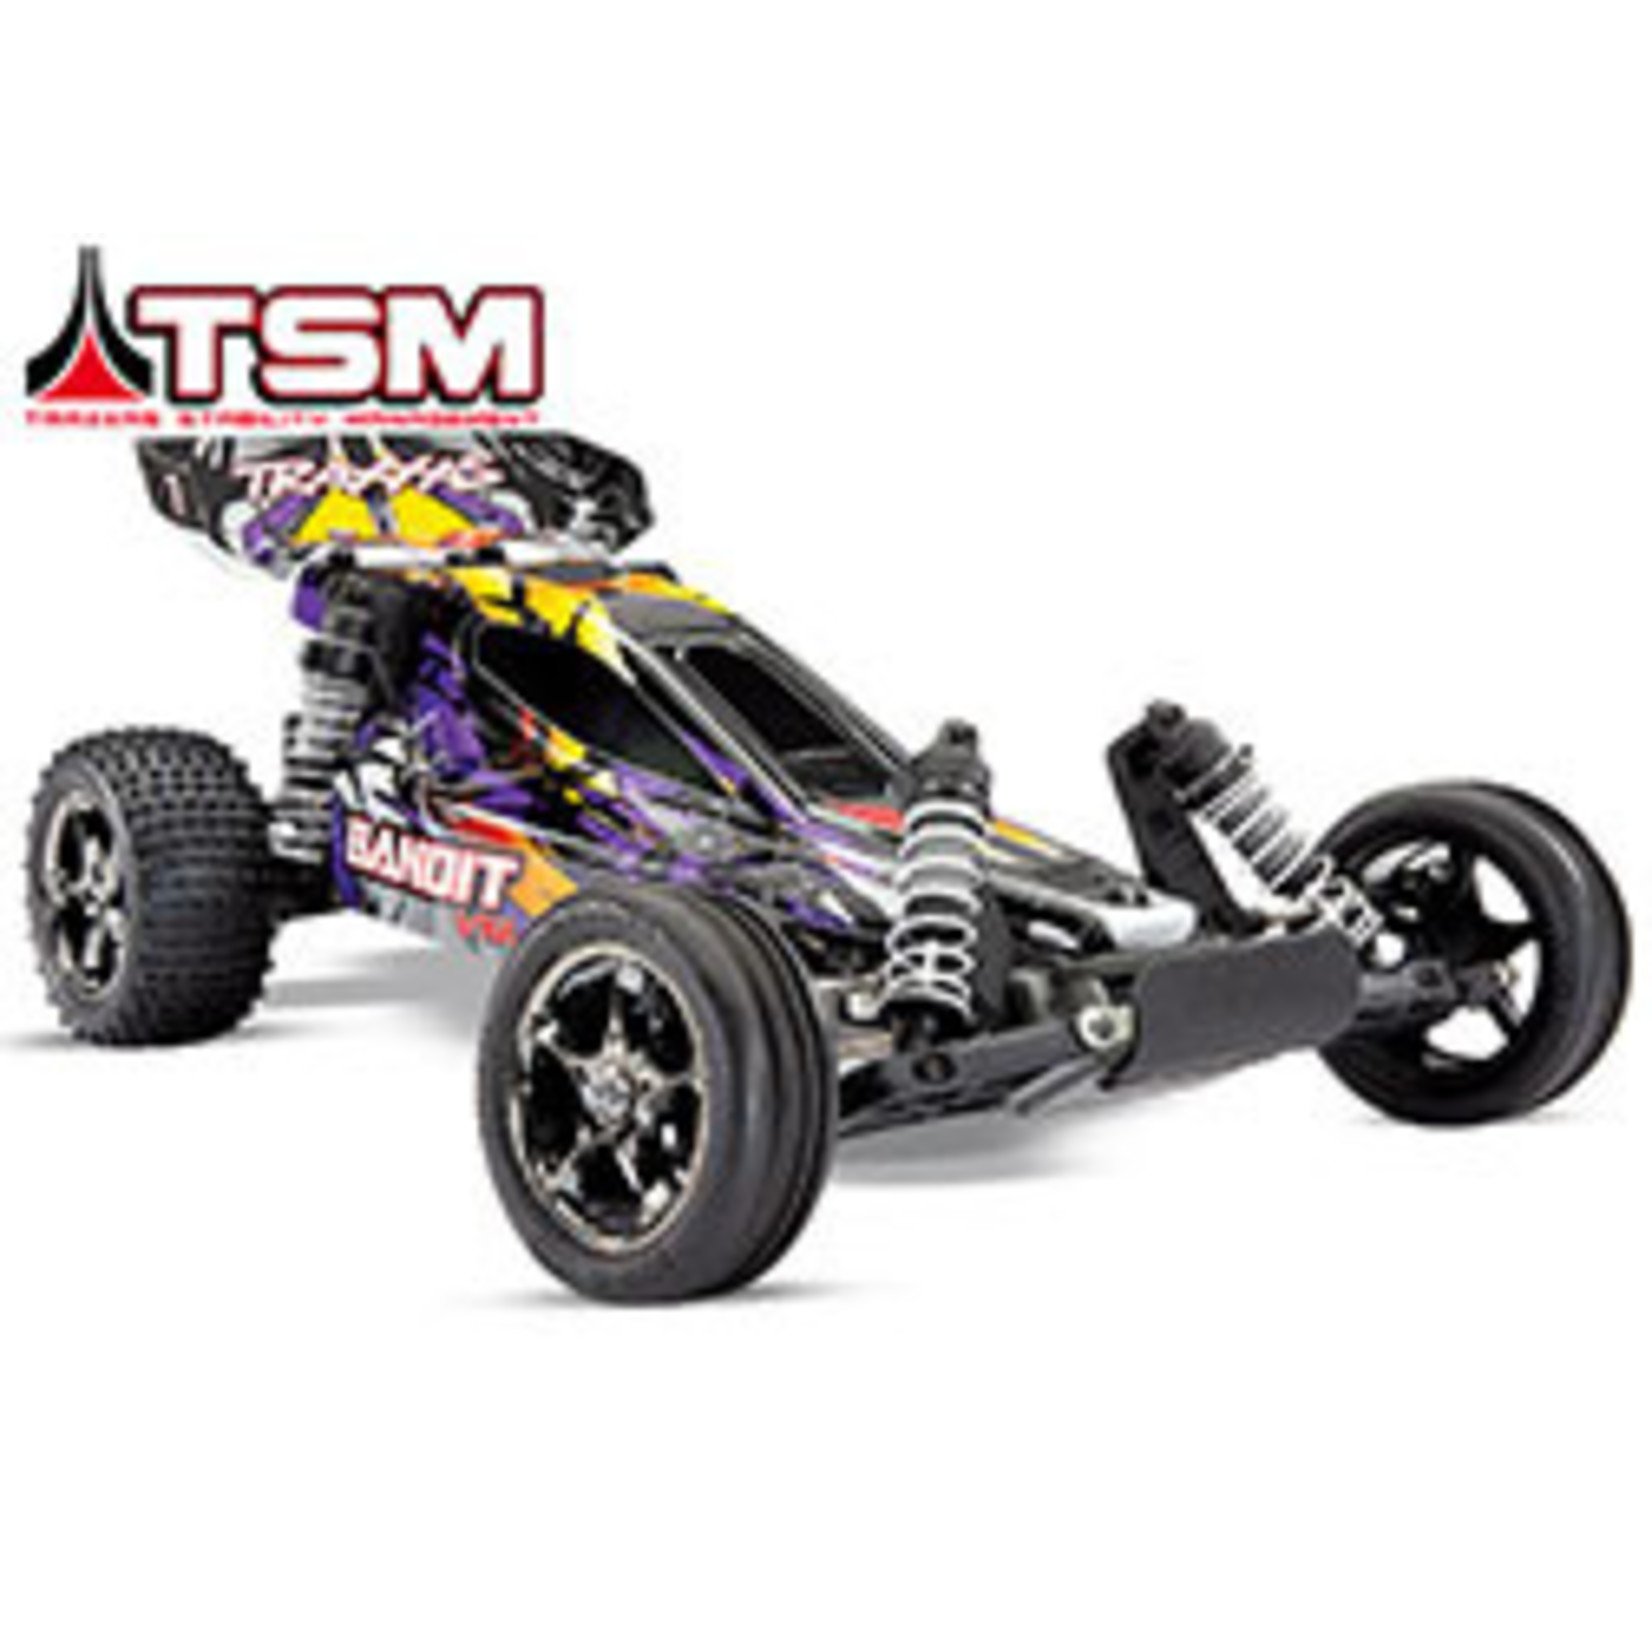 Traxxas 2478A   Tires & wheels, assembled (Tracer 2.2" black chrome wheels, Anaconda® 2.2" tires with foam inserts) (2) (Bandit rear)